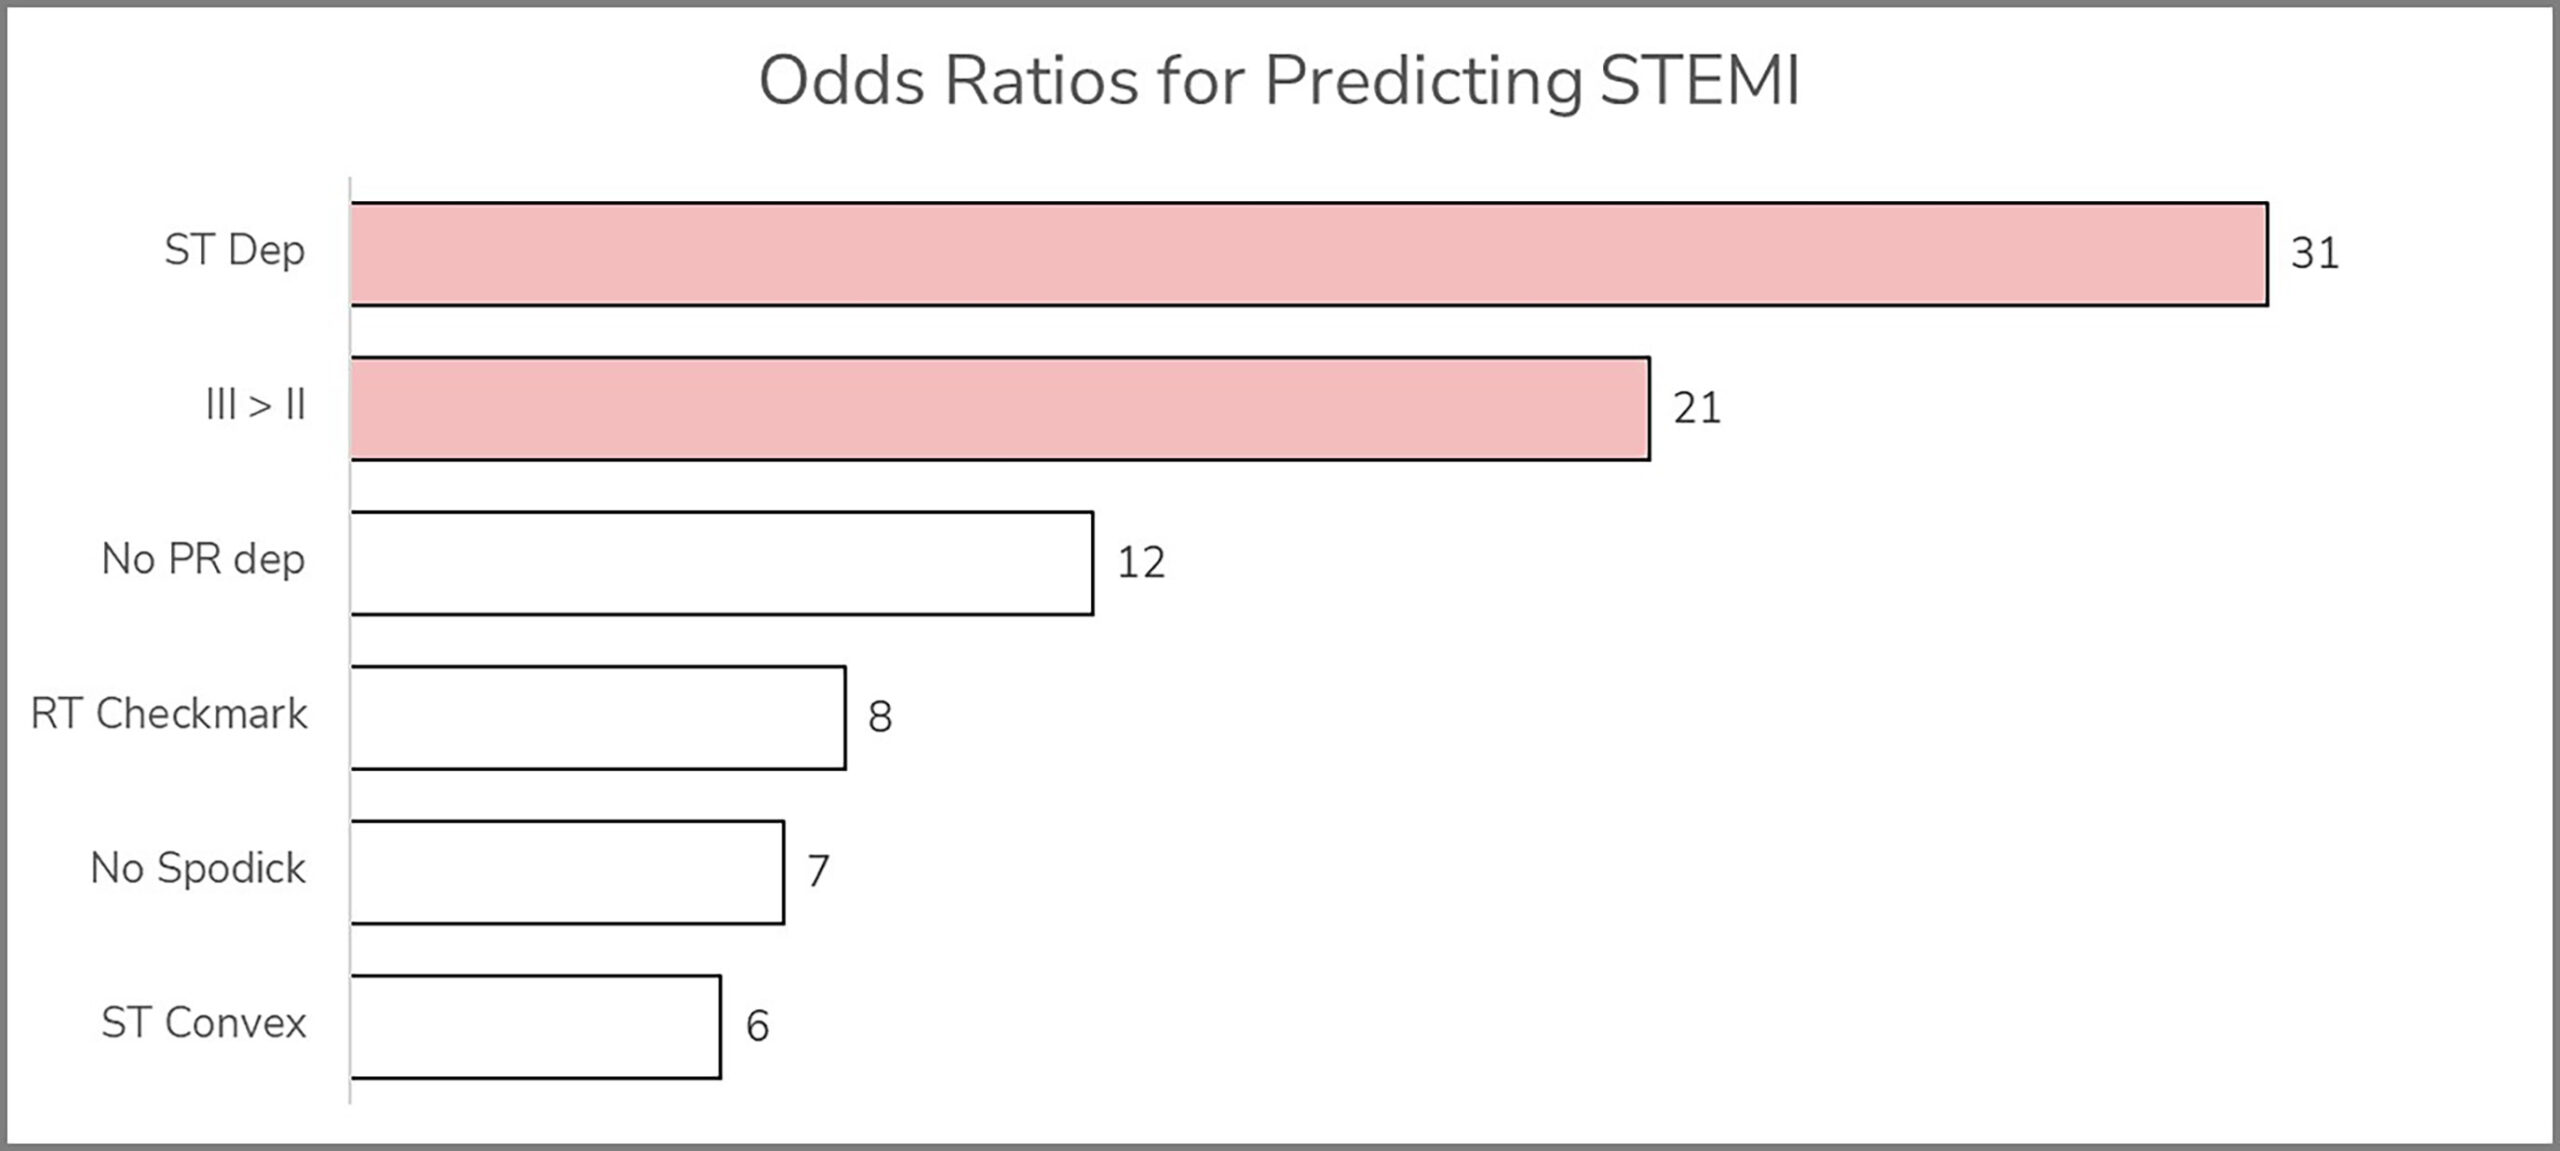 Odds ratios of various ECG findings for predicting STEMI vs. pericarditis. Reciprocal ST depressions (ST dep) and ST-elevation in III>II are the strongest predictors of STEMI.